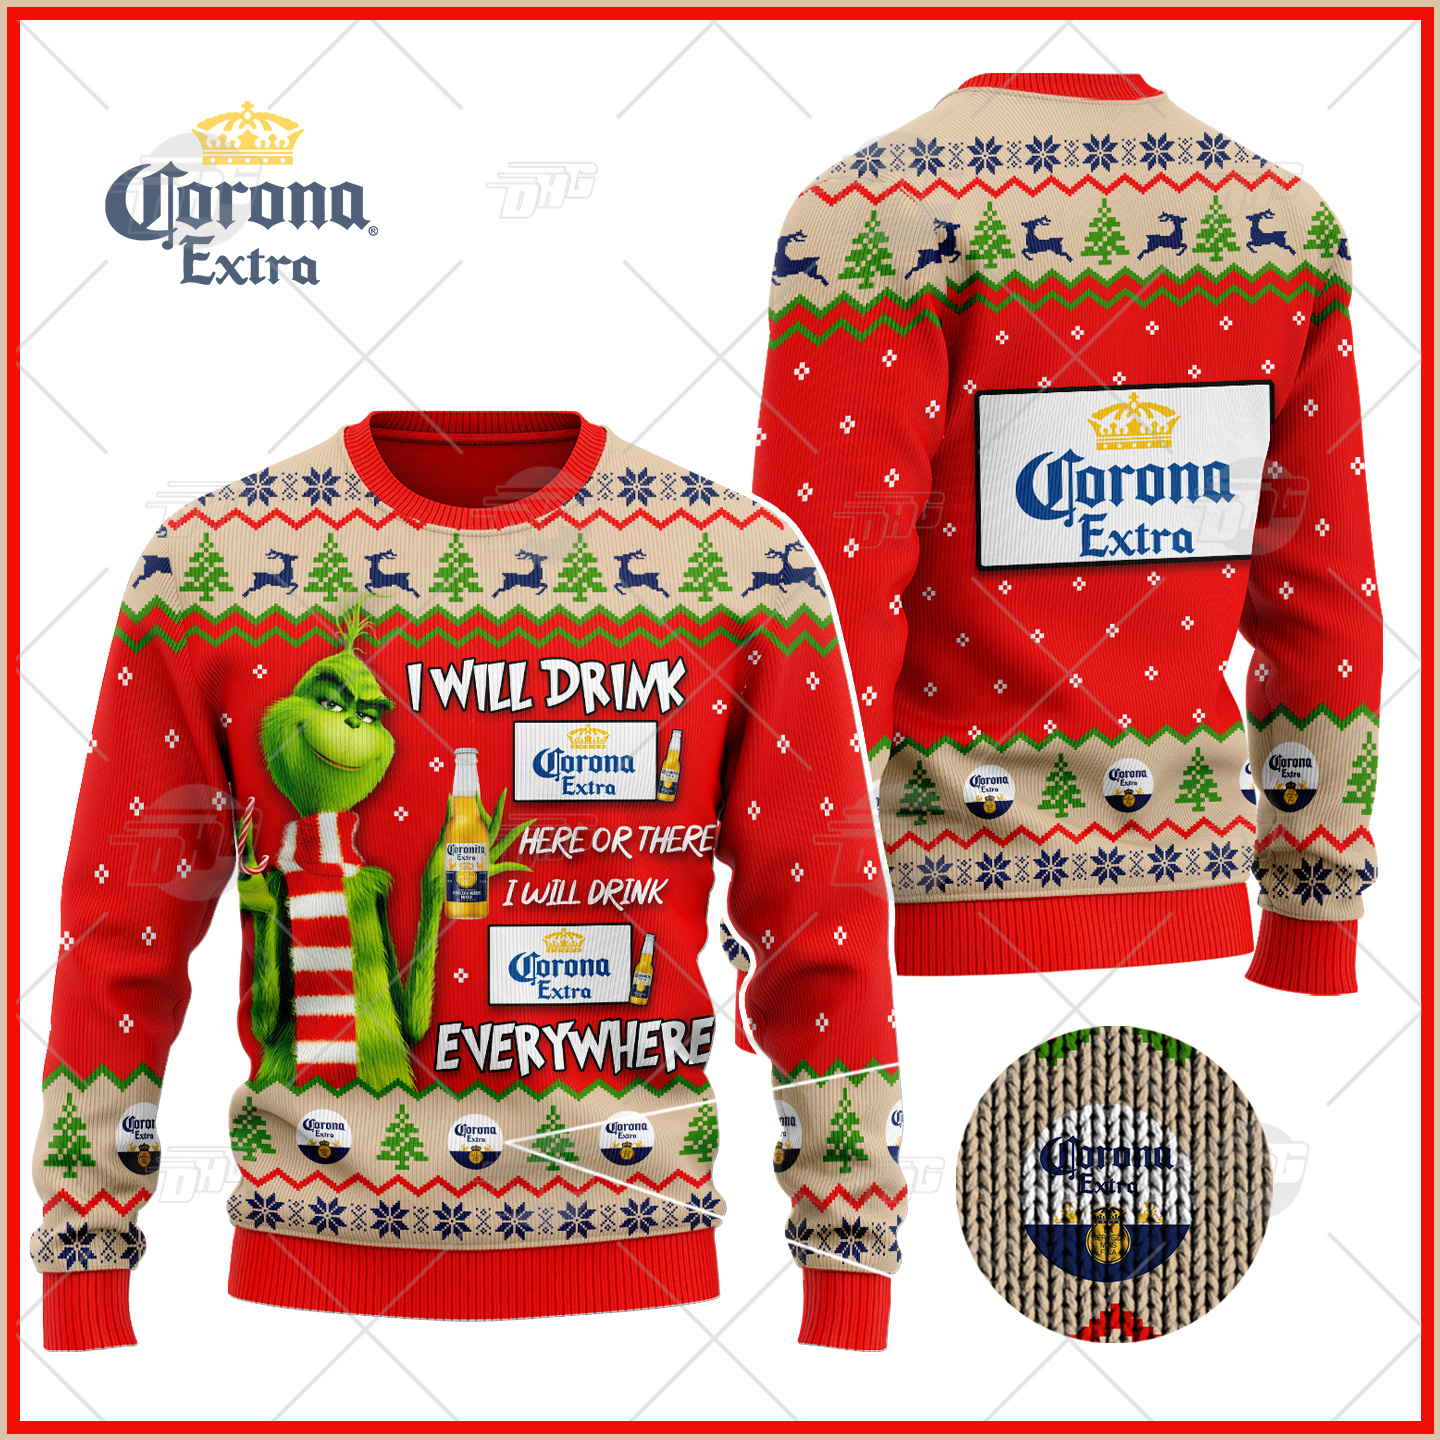 [ Amazing ] Grinch I Will Drink Here Or There I Will Drink Everywhere Corona Extra Beer Ugly Christmas Holiday Sweater – Saleoff 291121